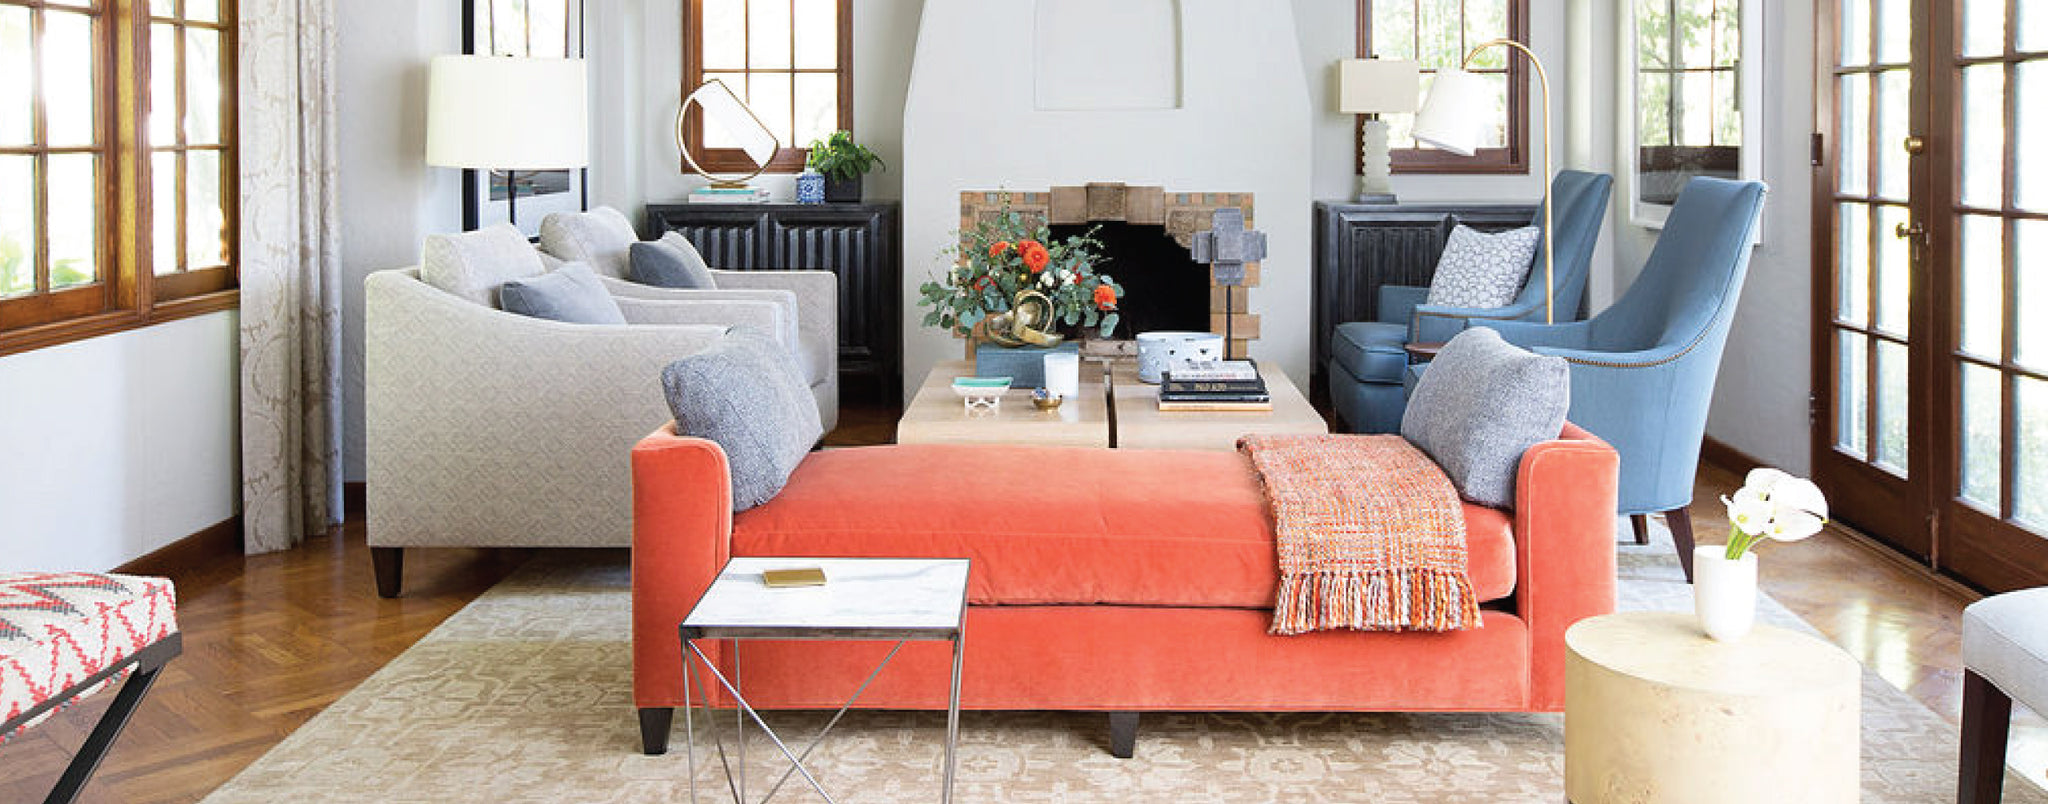 light filled living room interior featuring salmon colored daybed two grey lounge chair and two light blue club chairs in front of a fireplace